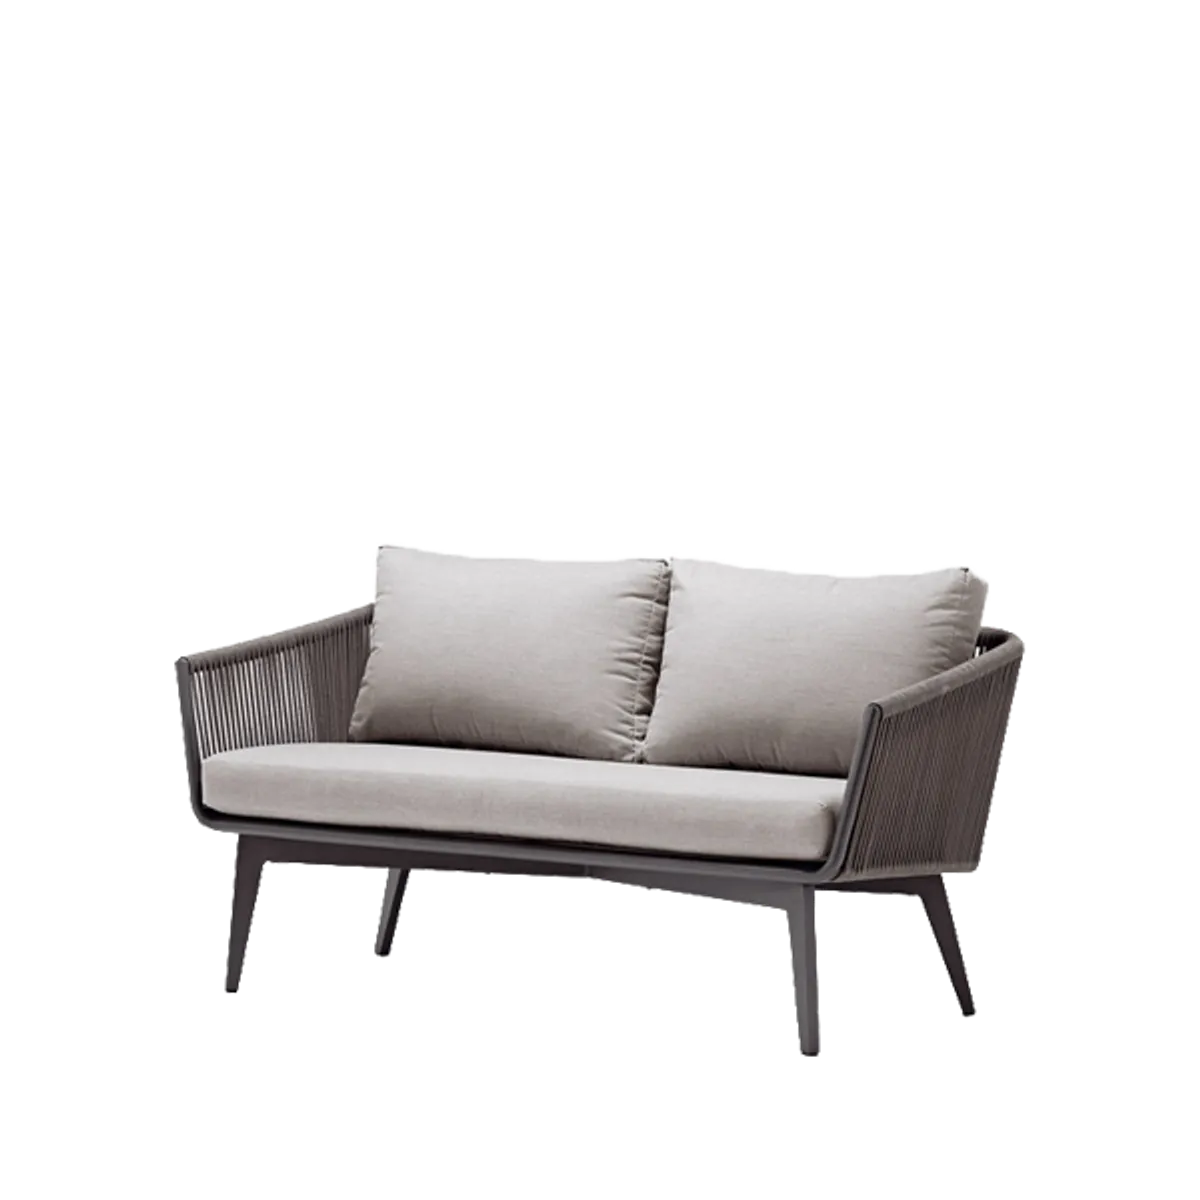 Desiree 2 seater sofa Inside Out Contracts